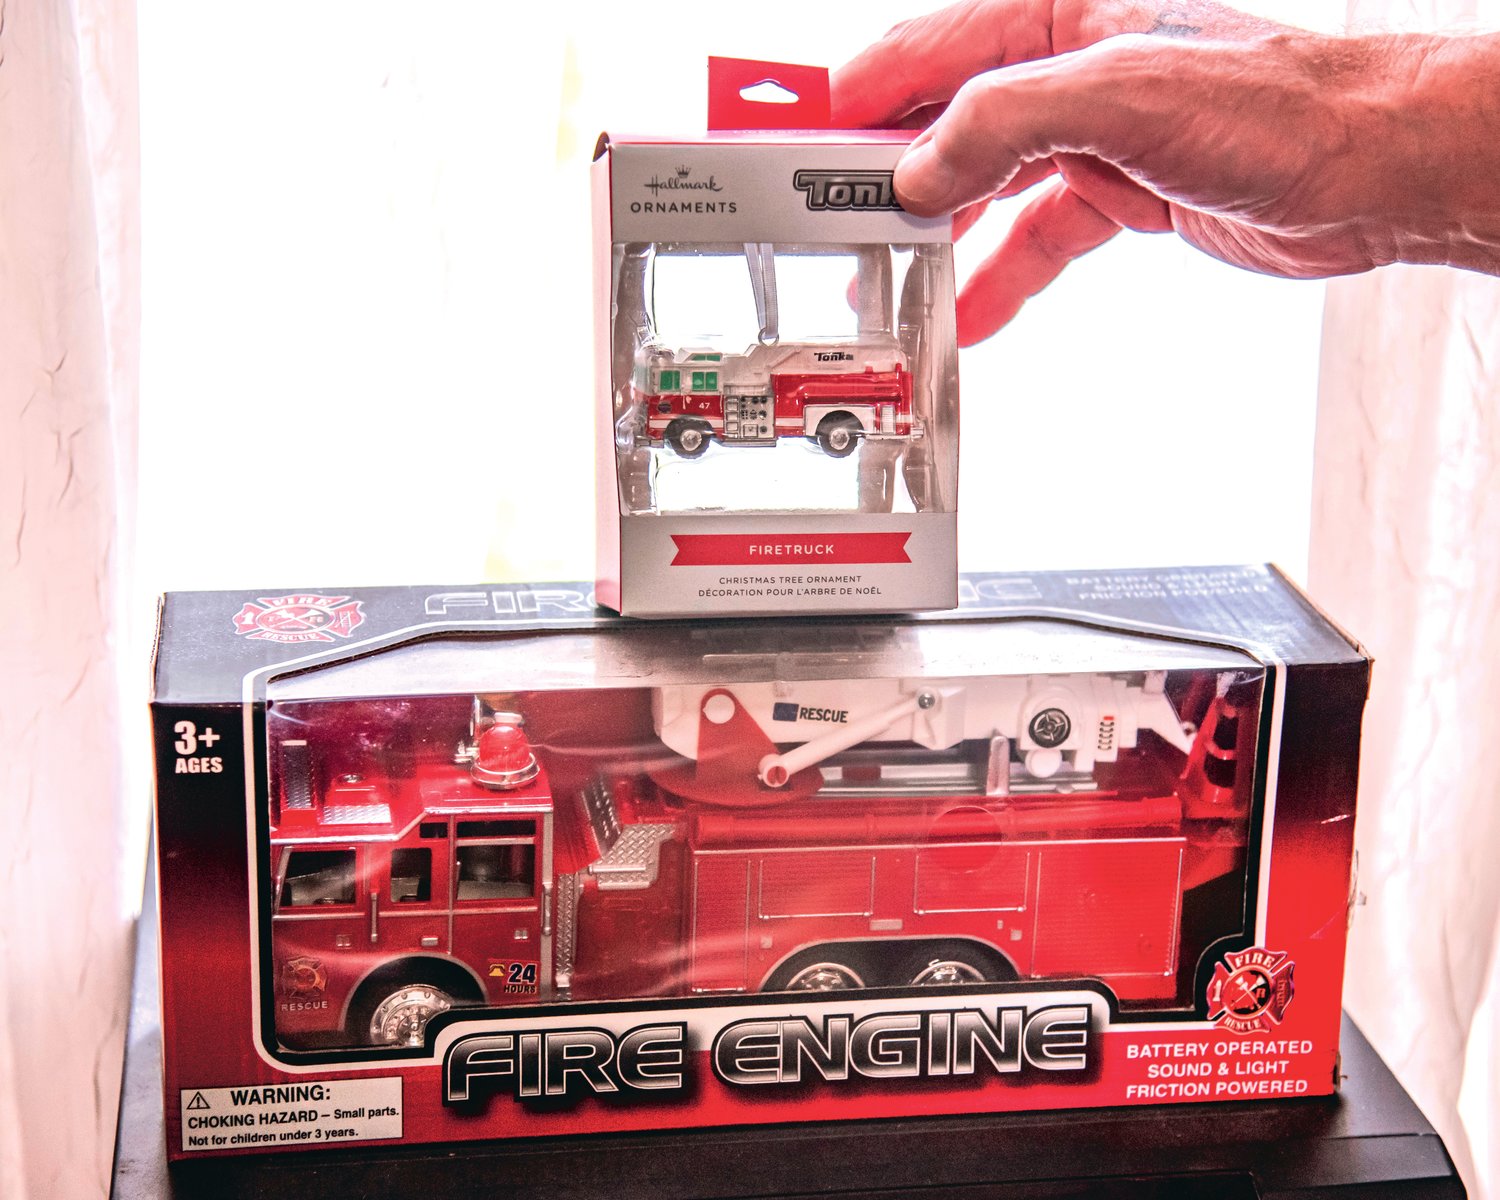 Charles Tippett Jr. talks about a firetruck ornament his caregiver bought for him that he keeps displayed in his living room in a Hallmark box Saturday in Centralia.